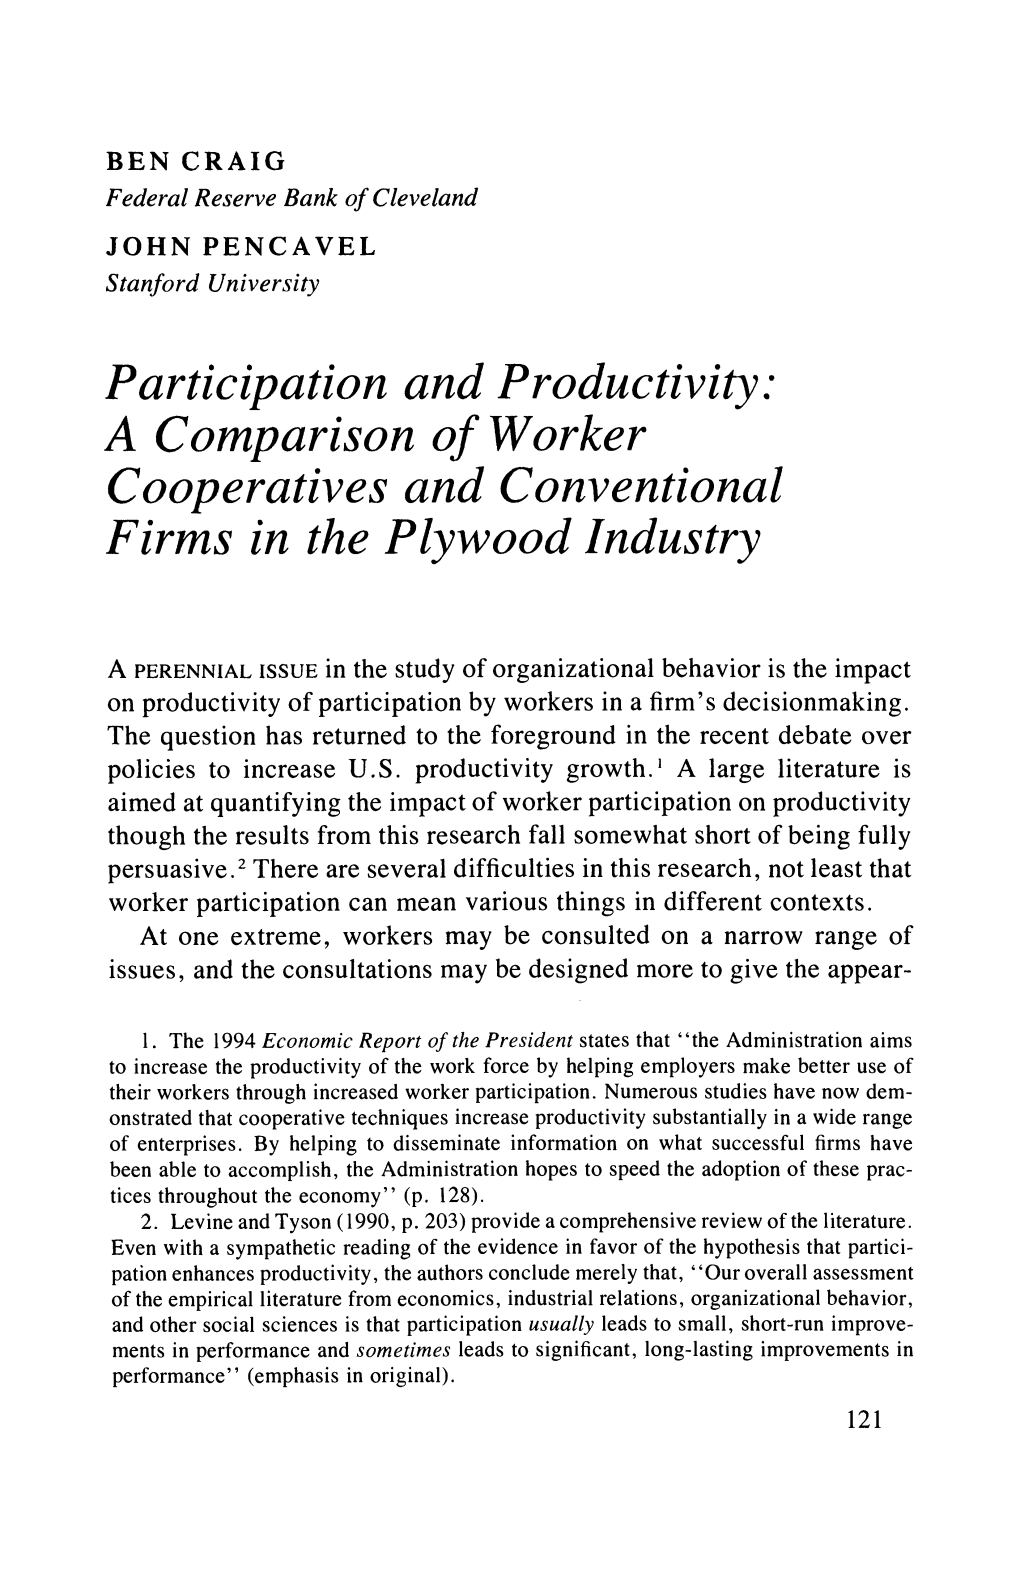 A Comparison of Worker Cooperatives and Conventional Firms in the Plywood Industry